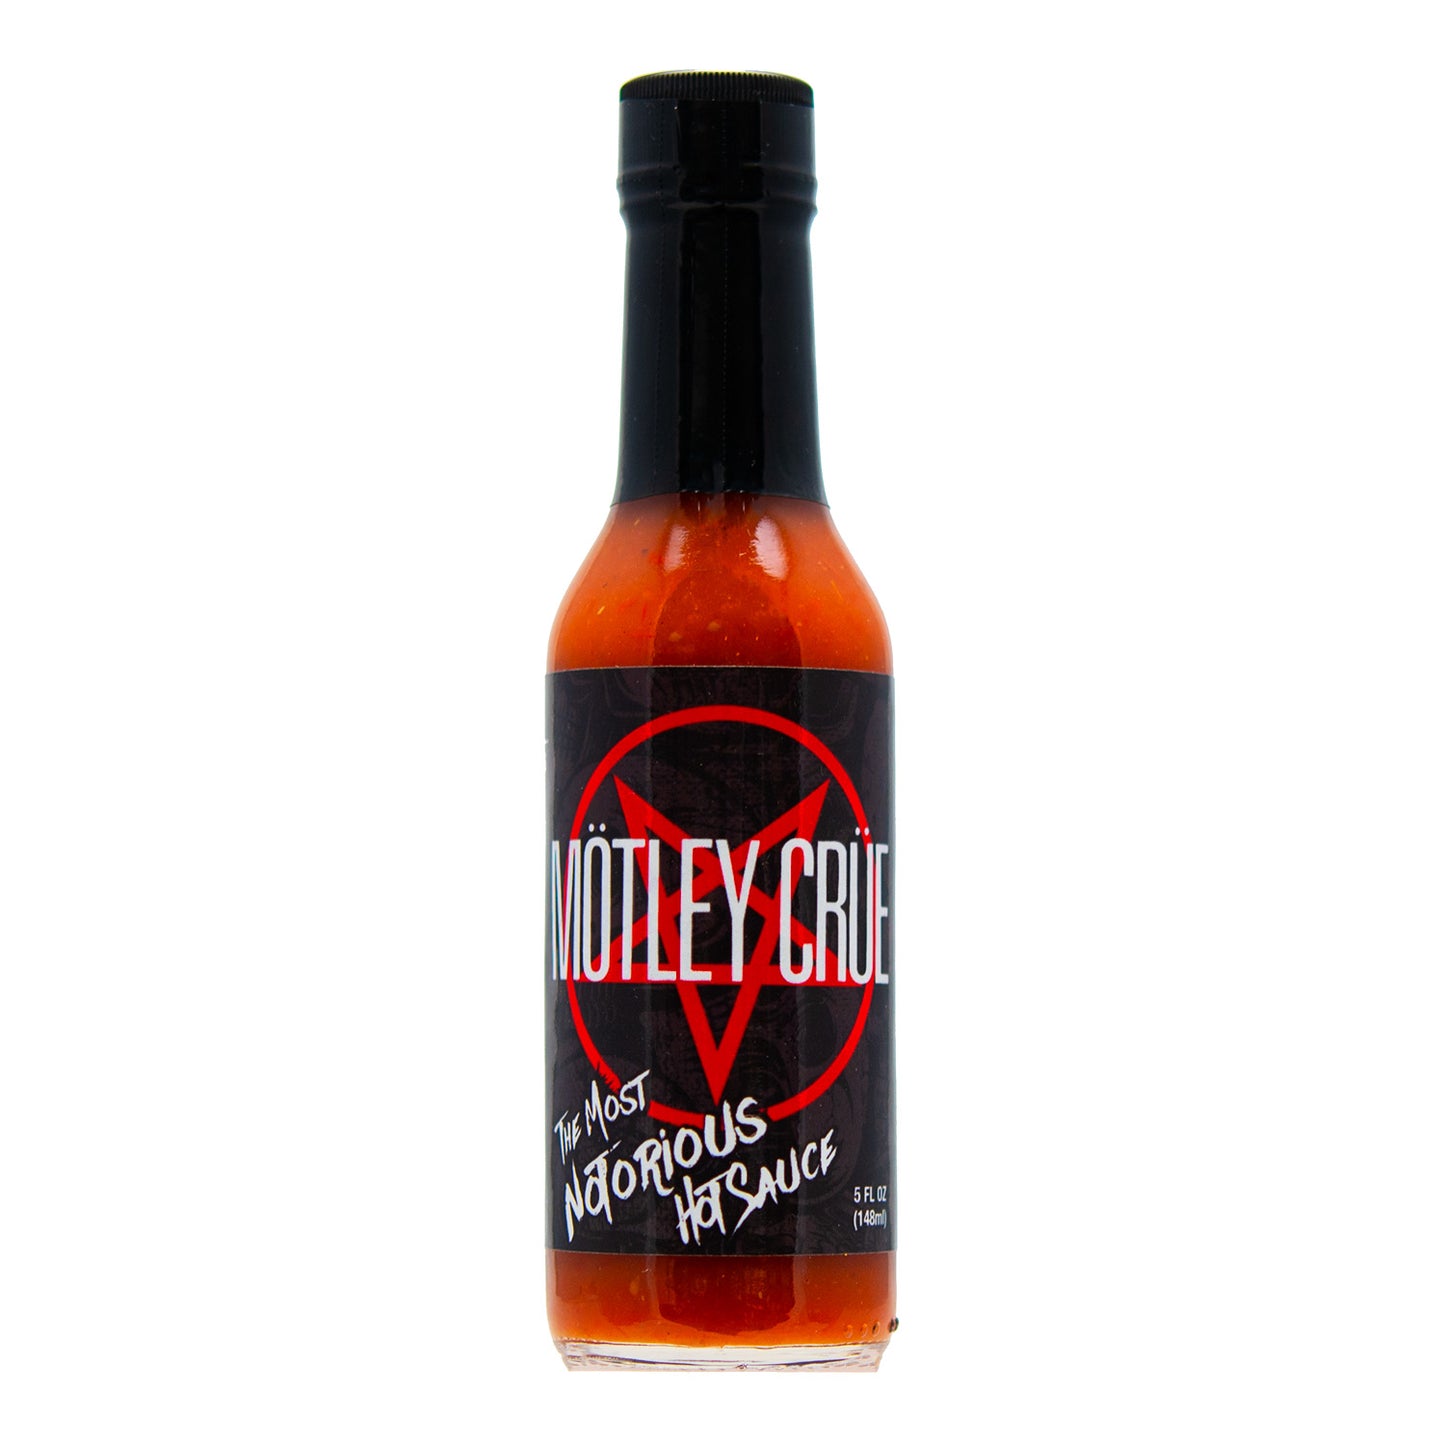 Mötley Crüe The Most Notorious Hot Sauce